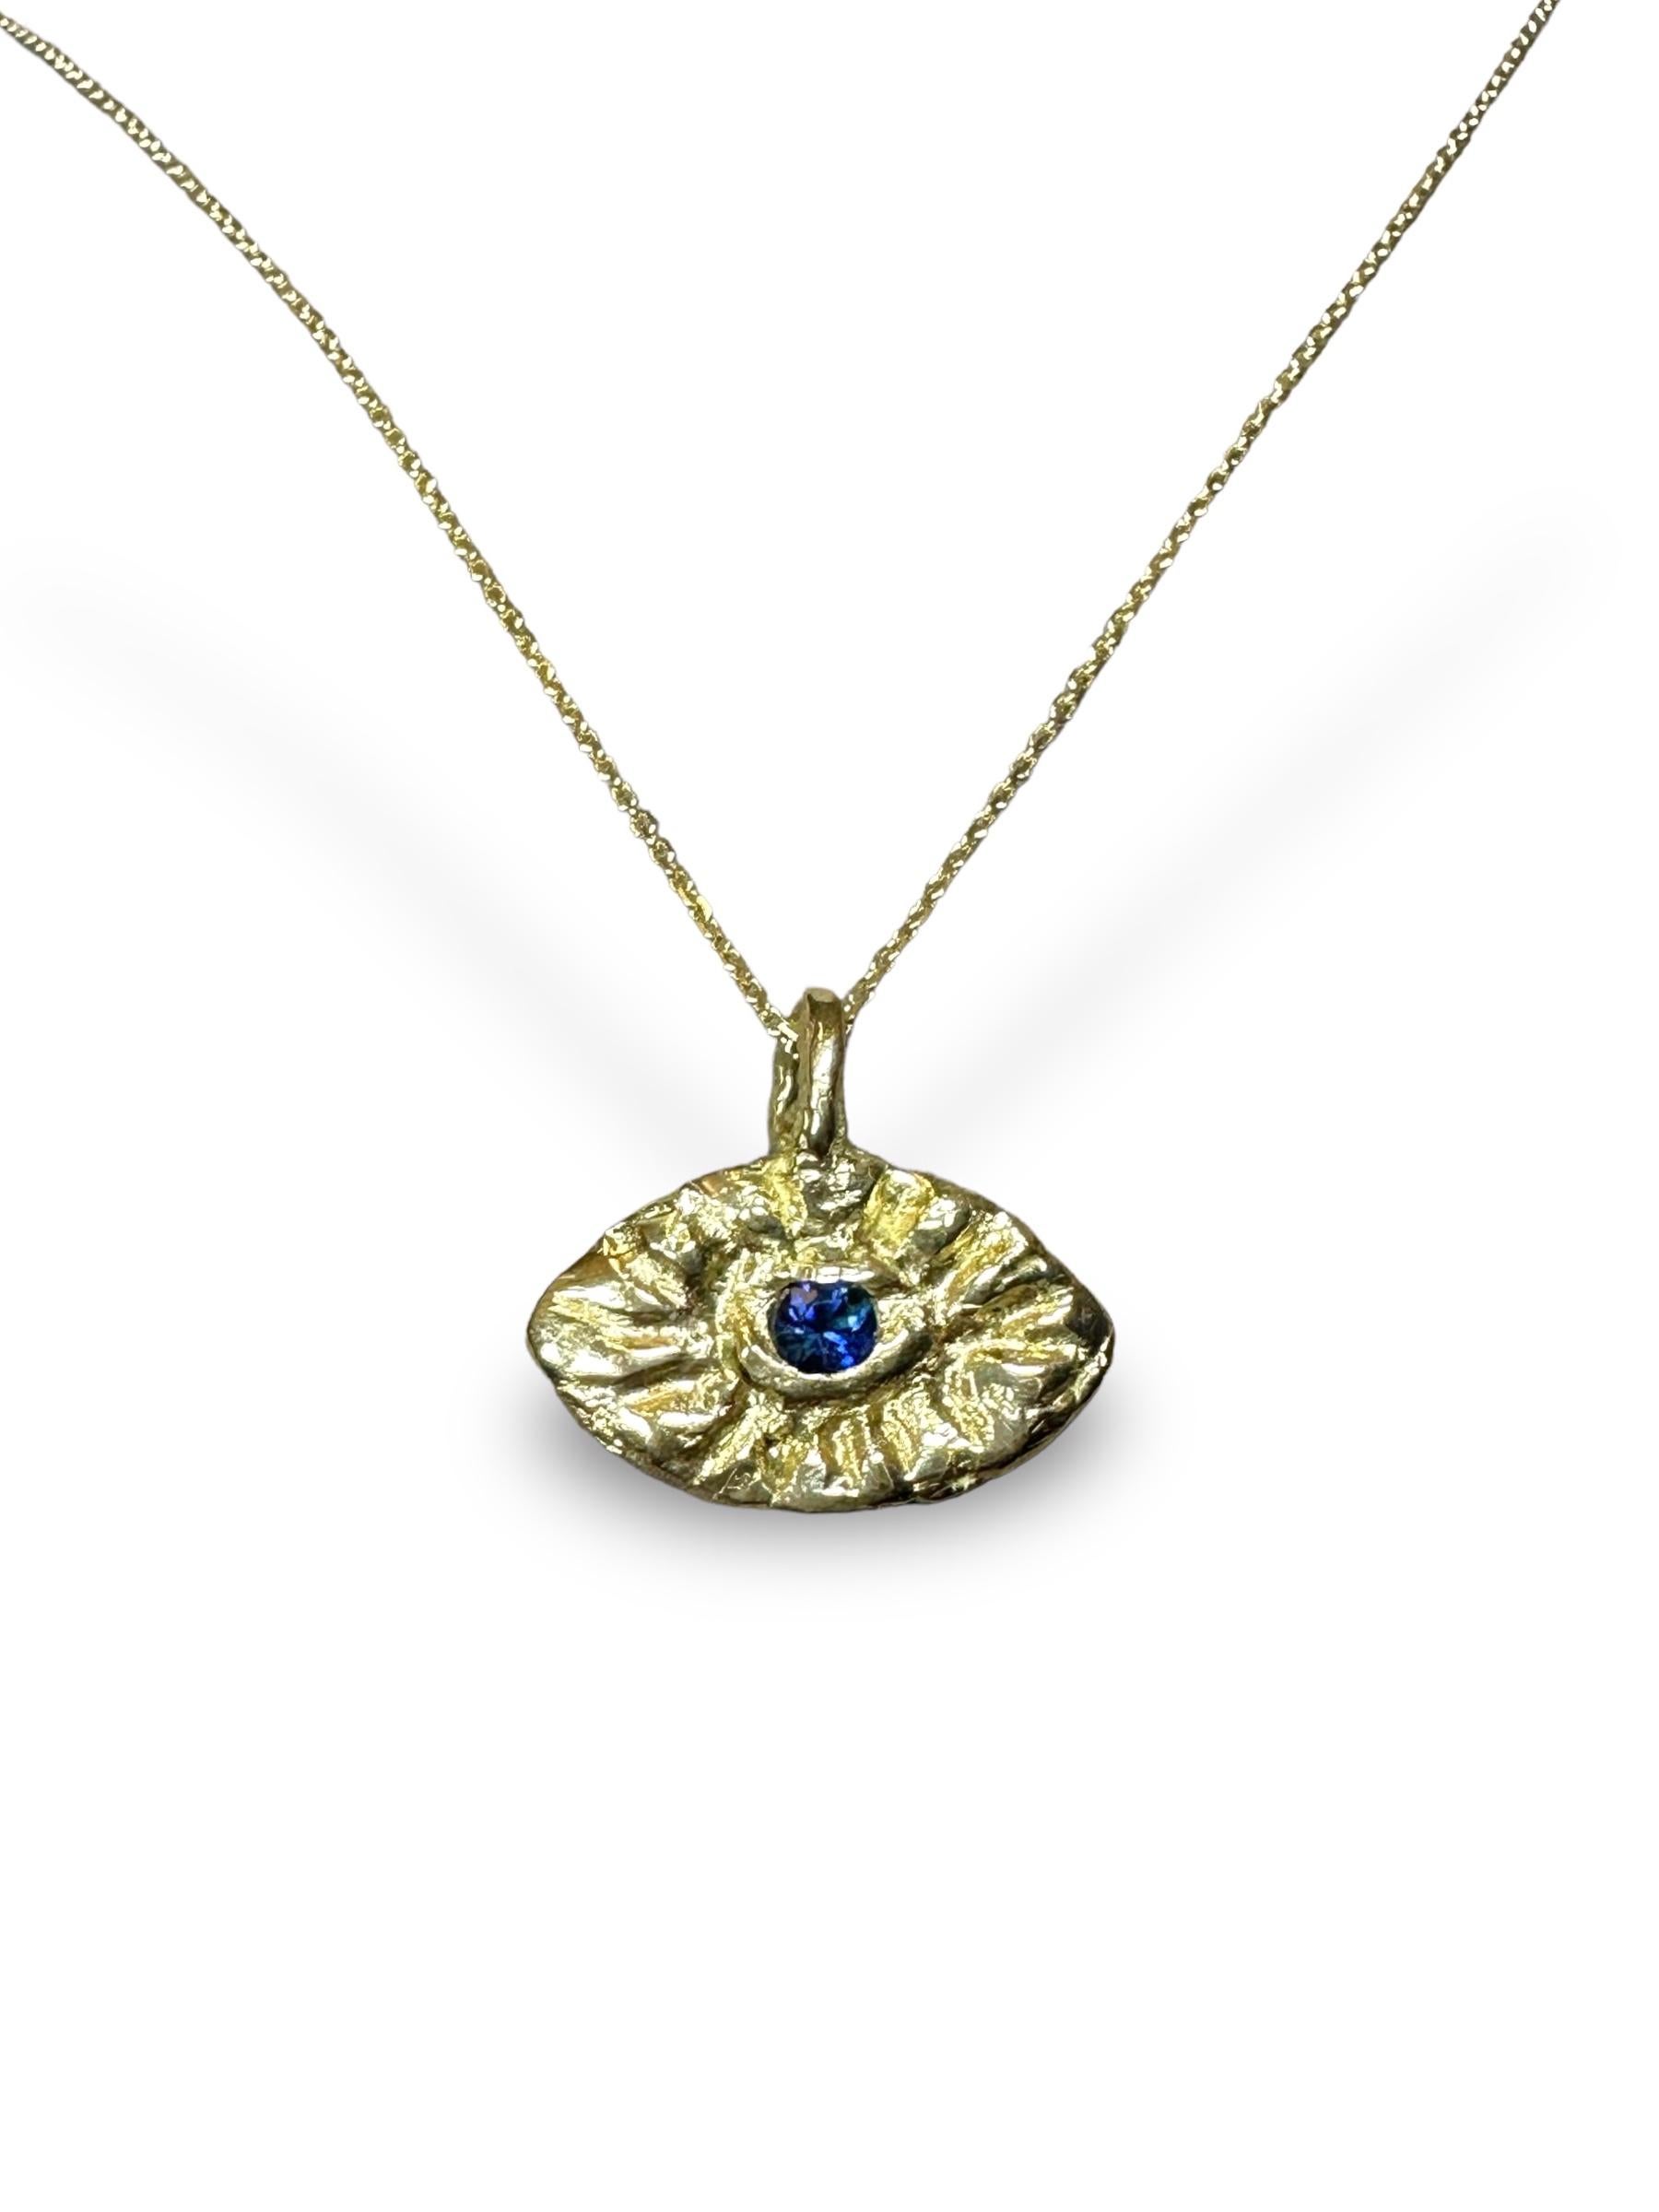 One of a kind 18K Yellow Gold Eye Pendant designed for men in mind but it can be worn by women also, it is a unisex necklace.

It comes with an 20” inch chain by default but please leave a comment on your order if you wish a different chain length.